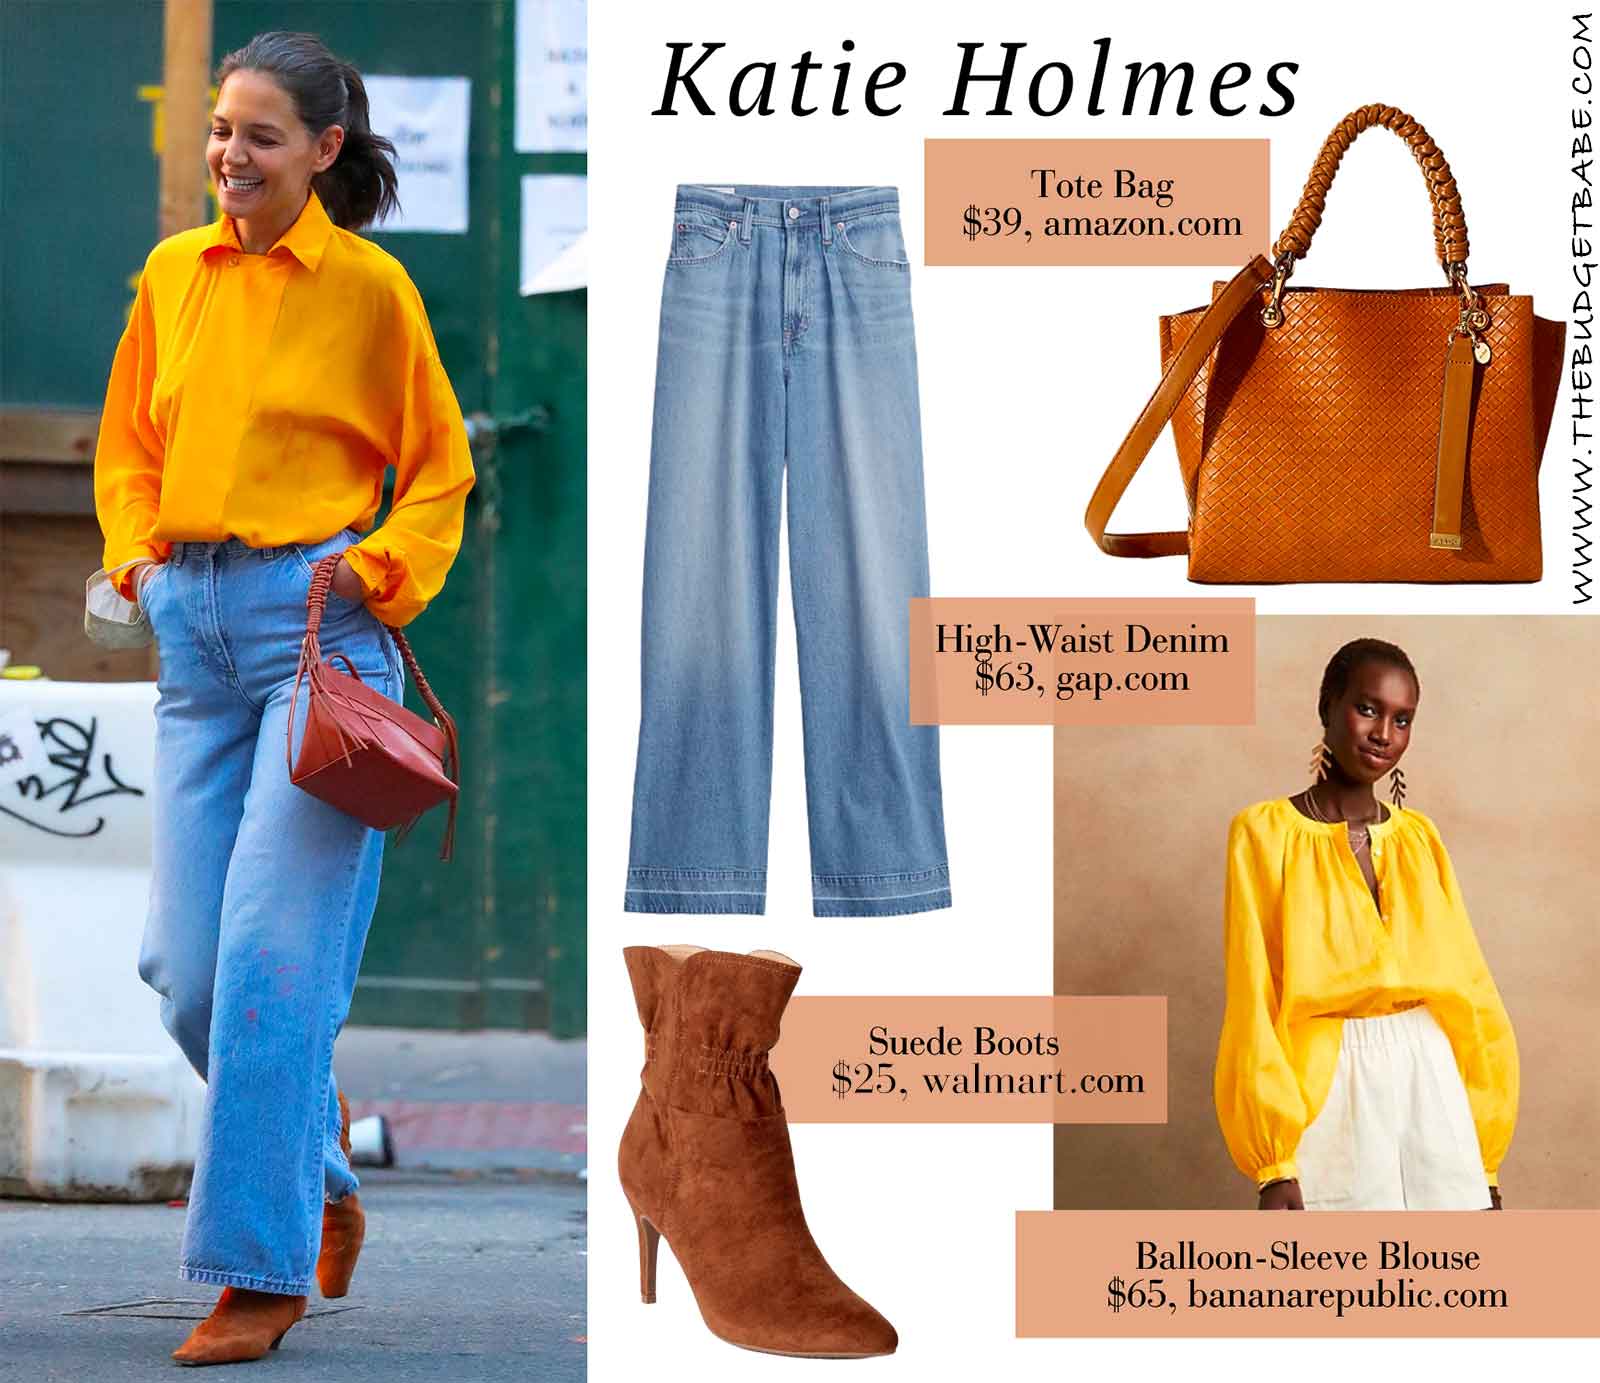 Katie Holmes' mustard yellow shirt with high waist wide legs jeans look for less